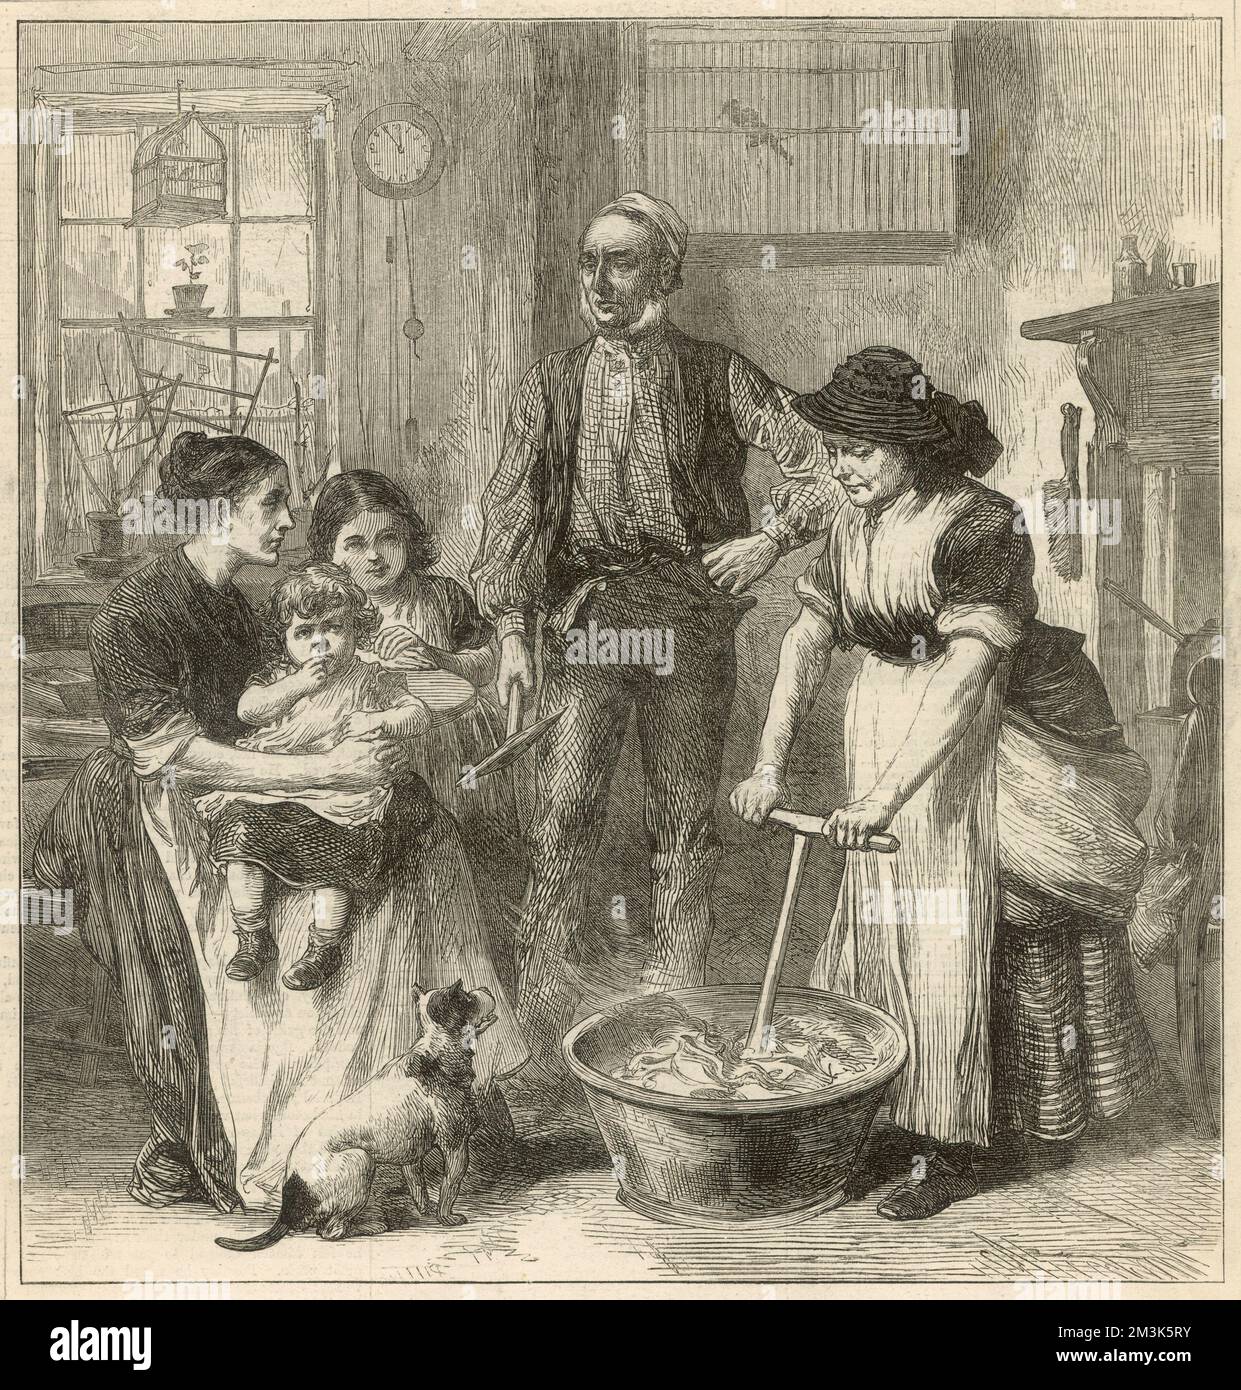 This shows the living conditions of Welsh colliers during the strike in South Wales. The interior of the cottage appears to be one room which is crowded with a woman doing the laundry, another sitting with two children and a small animal (dog or a cat), as well as a man standing with his colliery implement. Presiding over all this is a dejected looking bird in a cage.  1873 Stock Photo